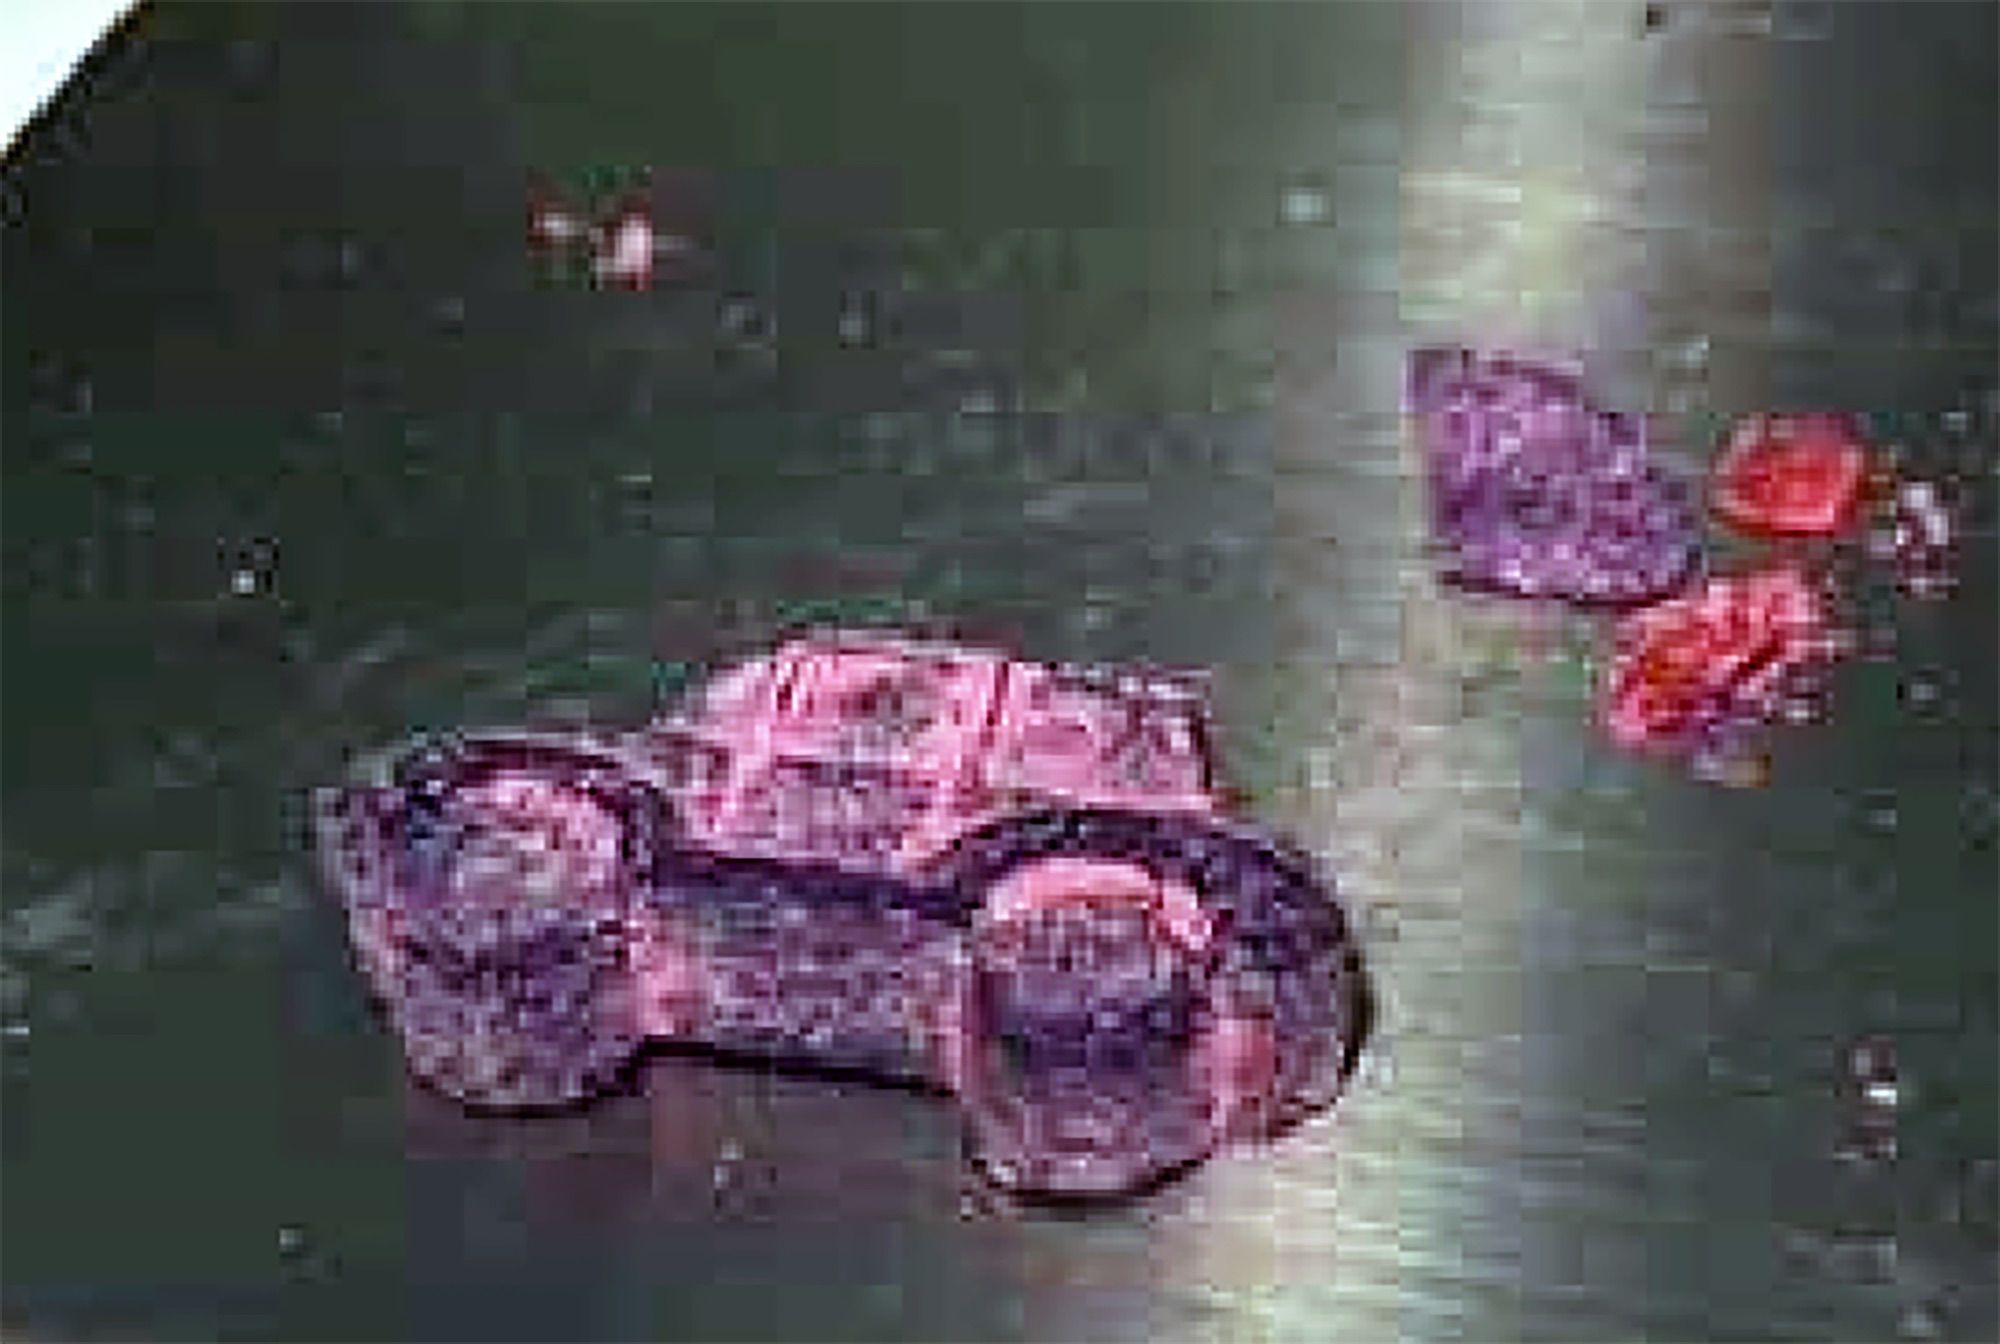 Kingston Police warn about toy car gummy